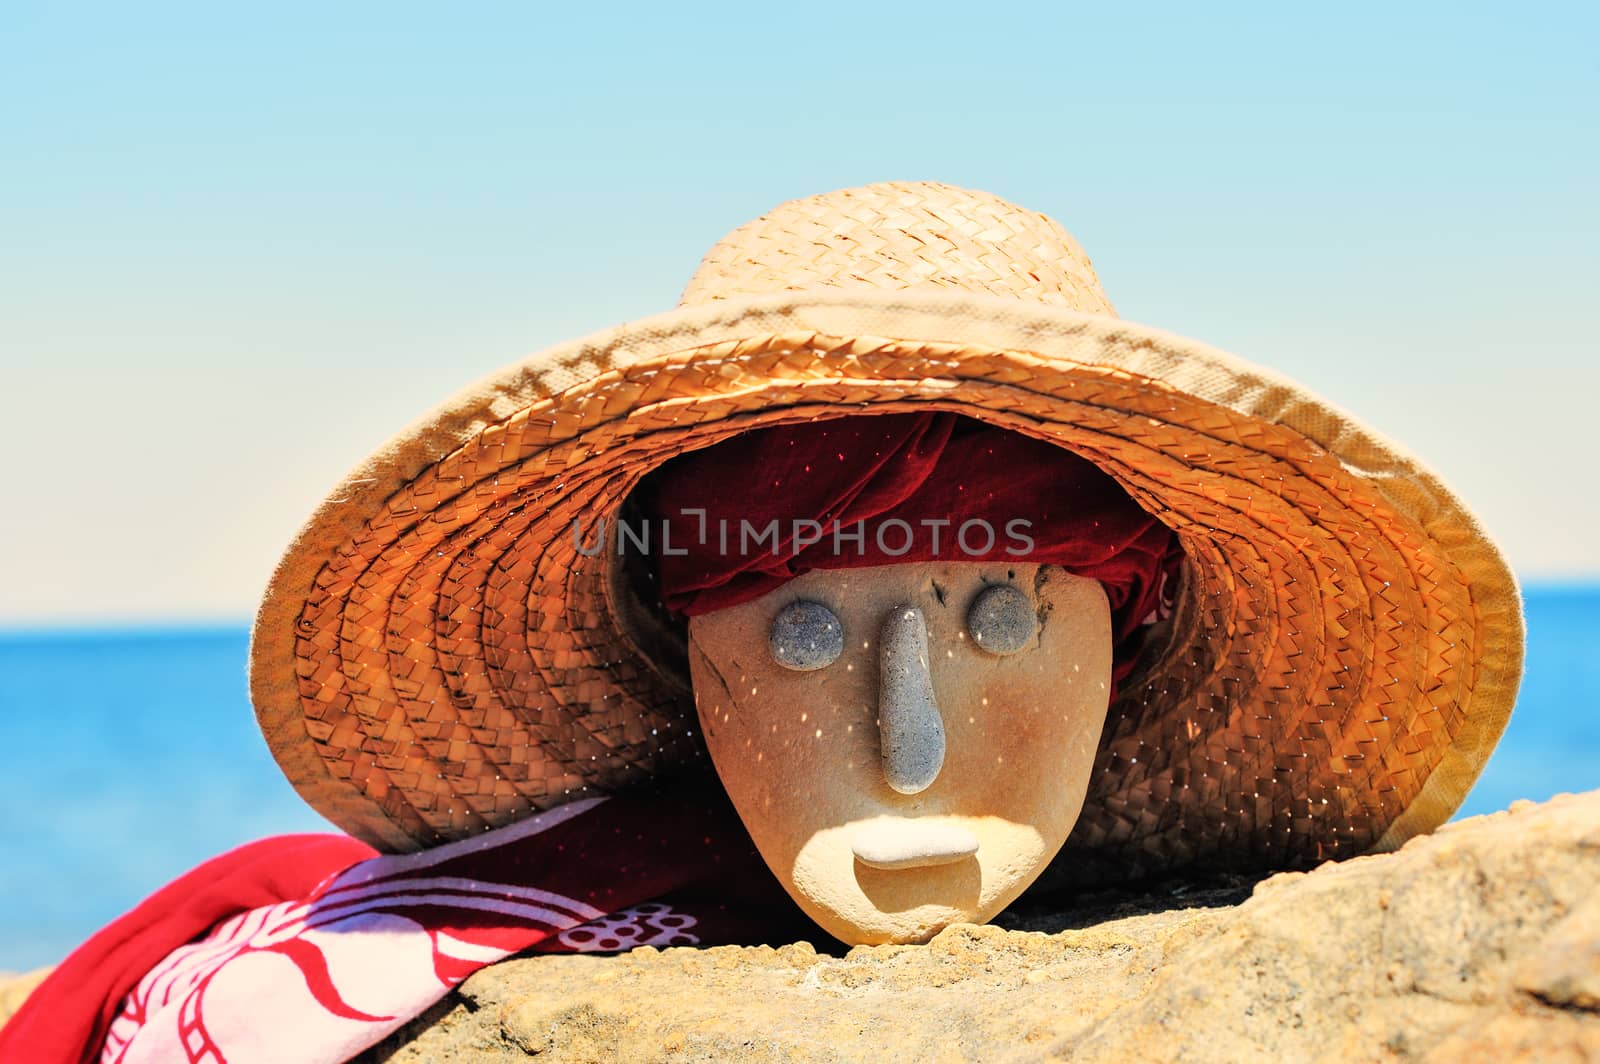 Stone head with a wicker hat and bandana